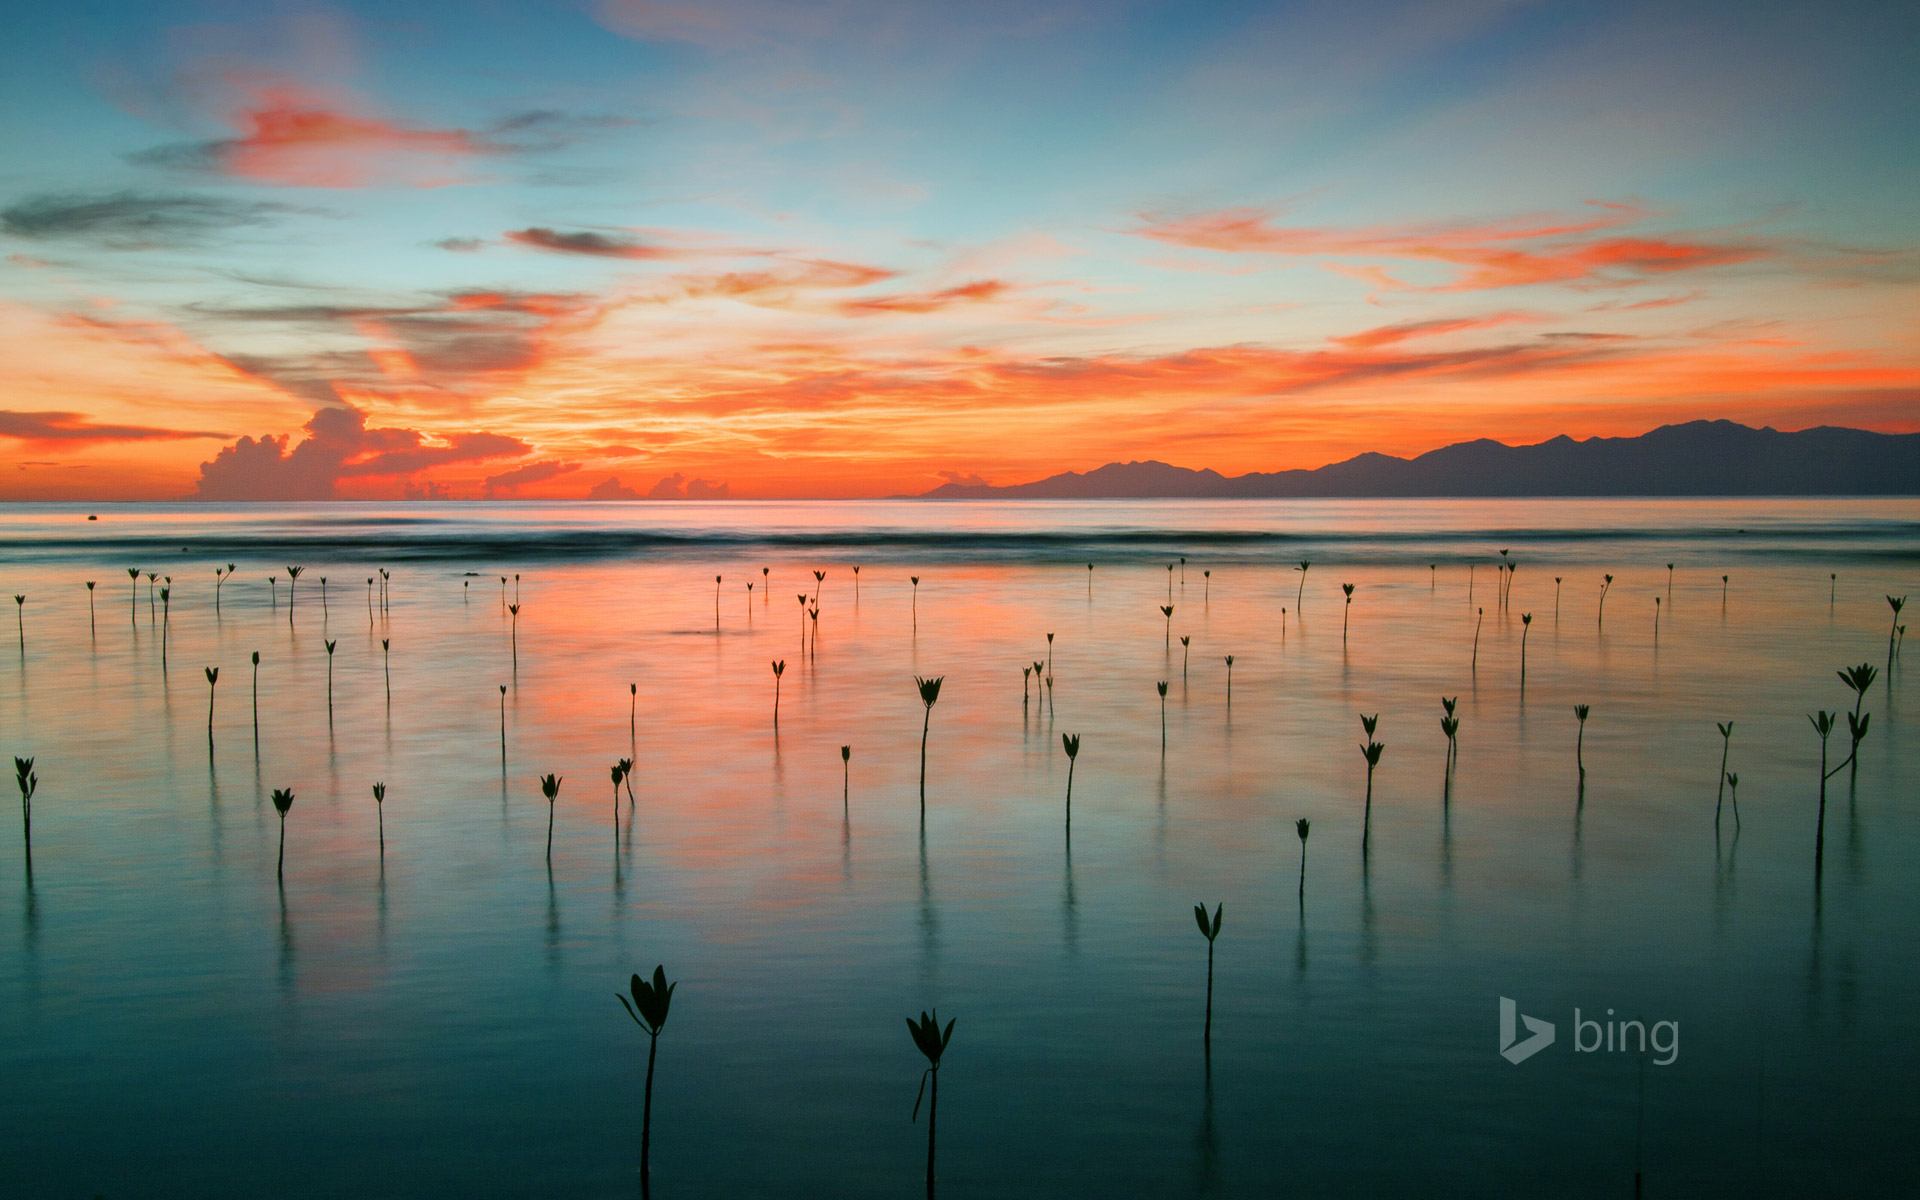 Bing's Homepage Gallery Offers The Most Beautiful Wallpapers Imaginable ...